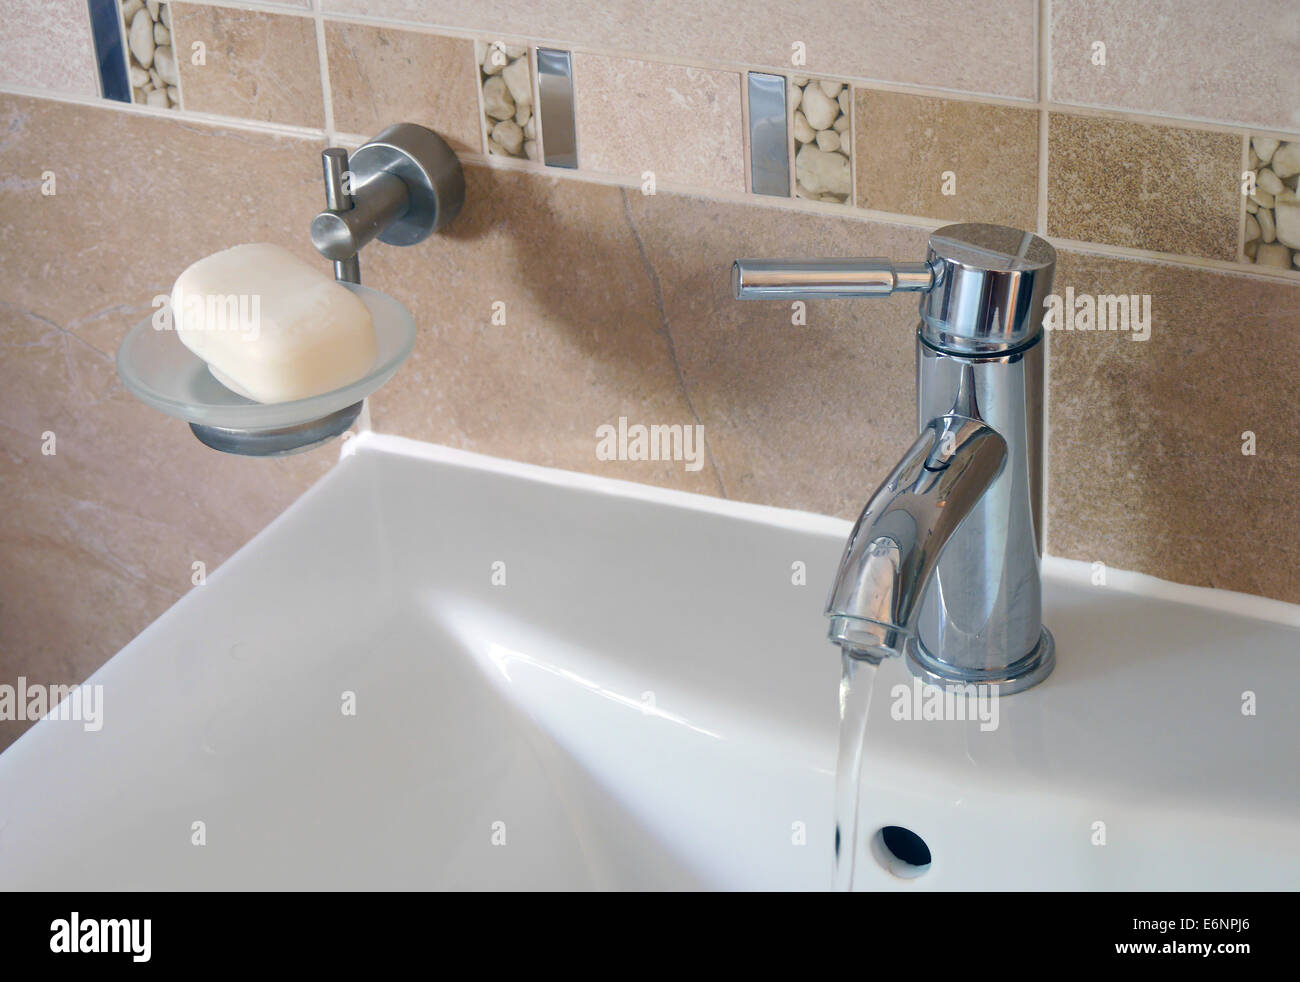 Closeup Of Running Water From Tap In Bathroom Sink Stock Photo Alamy